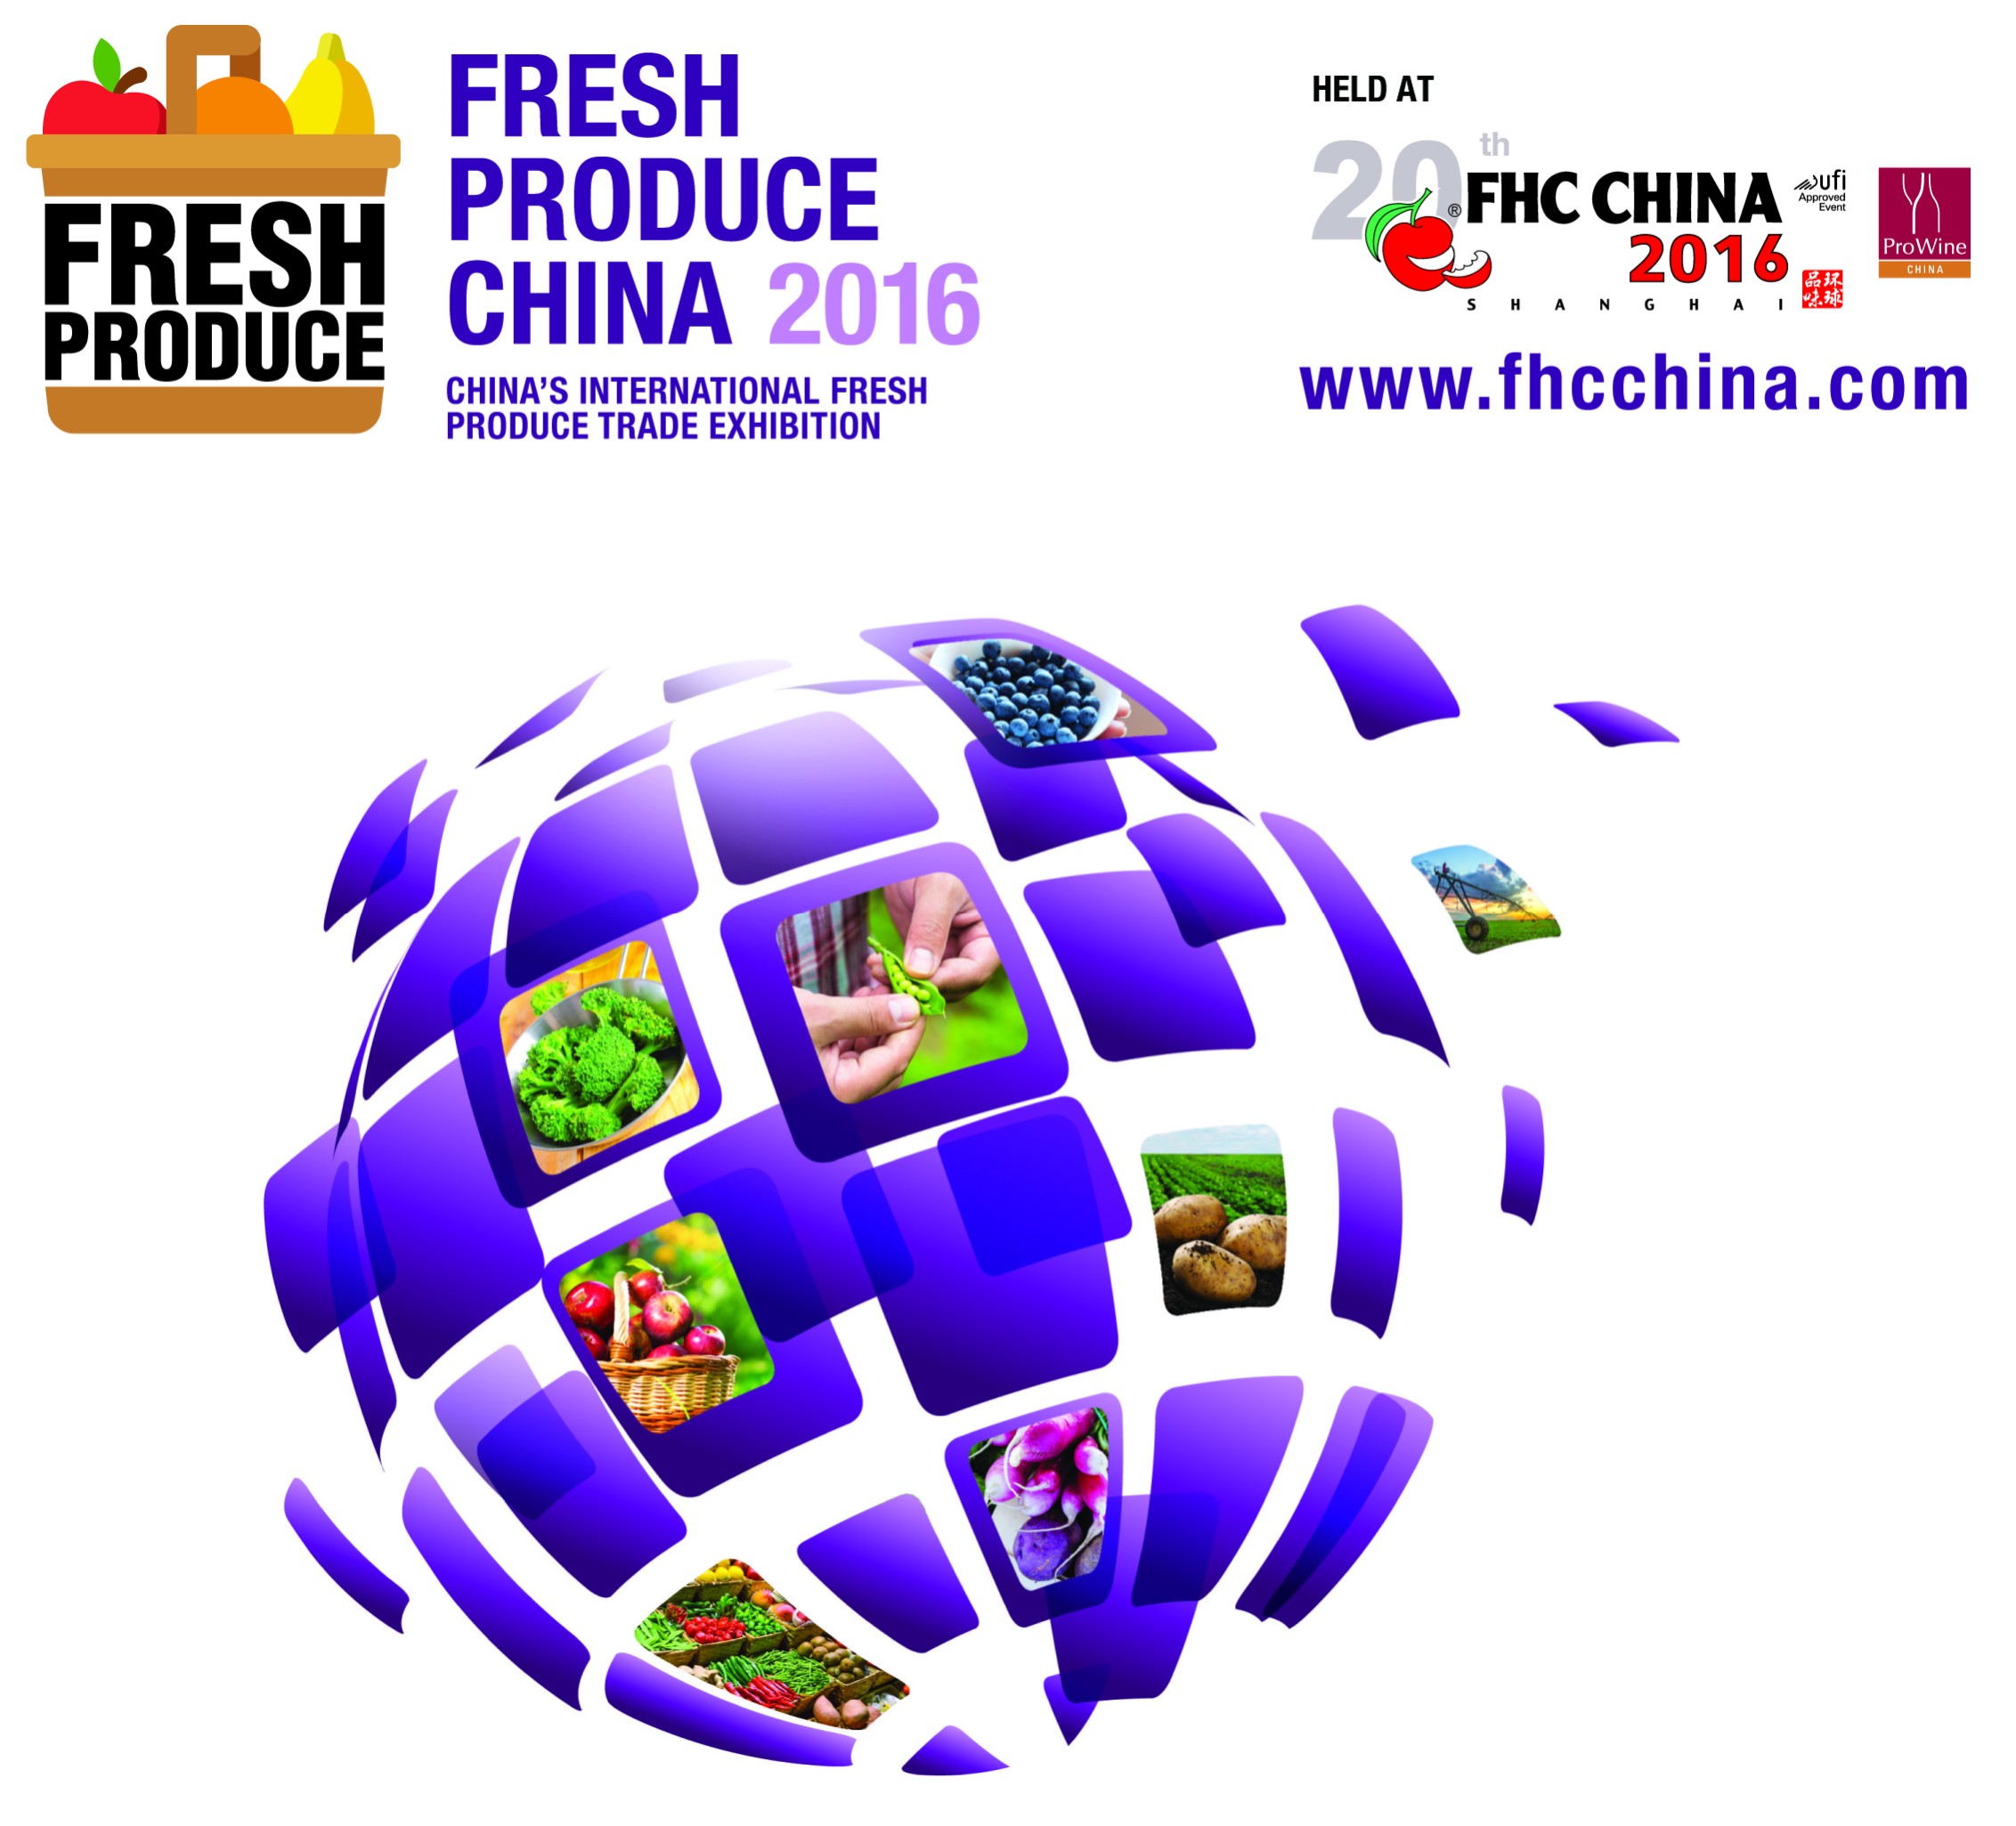 e 20th FHC China exhibition for imported foods and hospitality products and held alongside the 4th edition of ProWine China, for wine and spirits from 7-9 November 2016, is on track to be bigger than ever before.